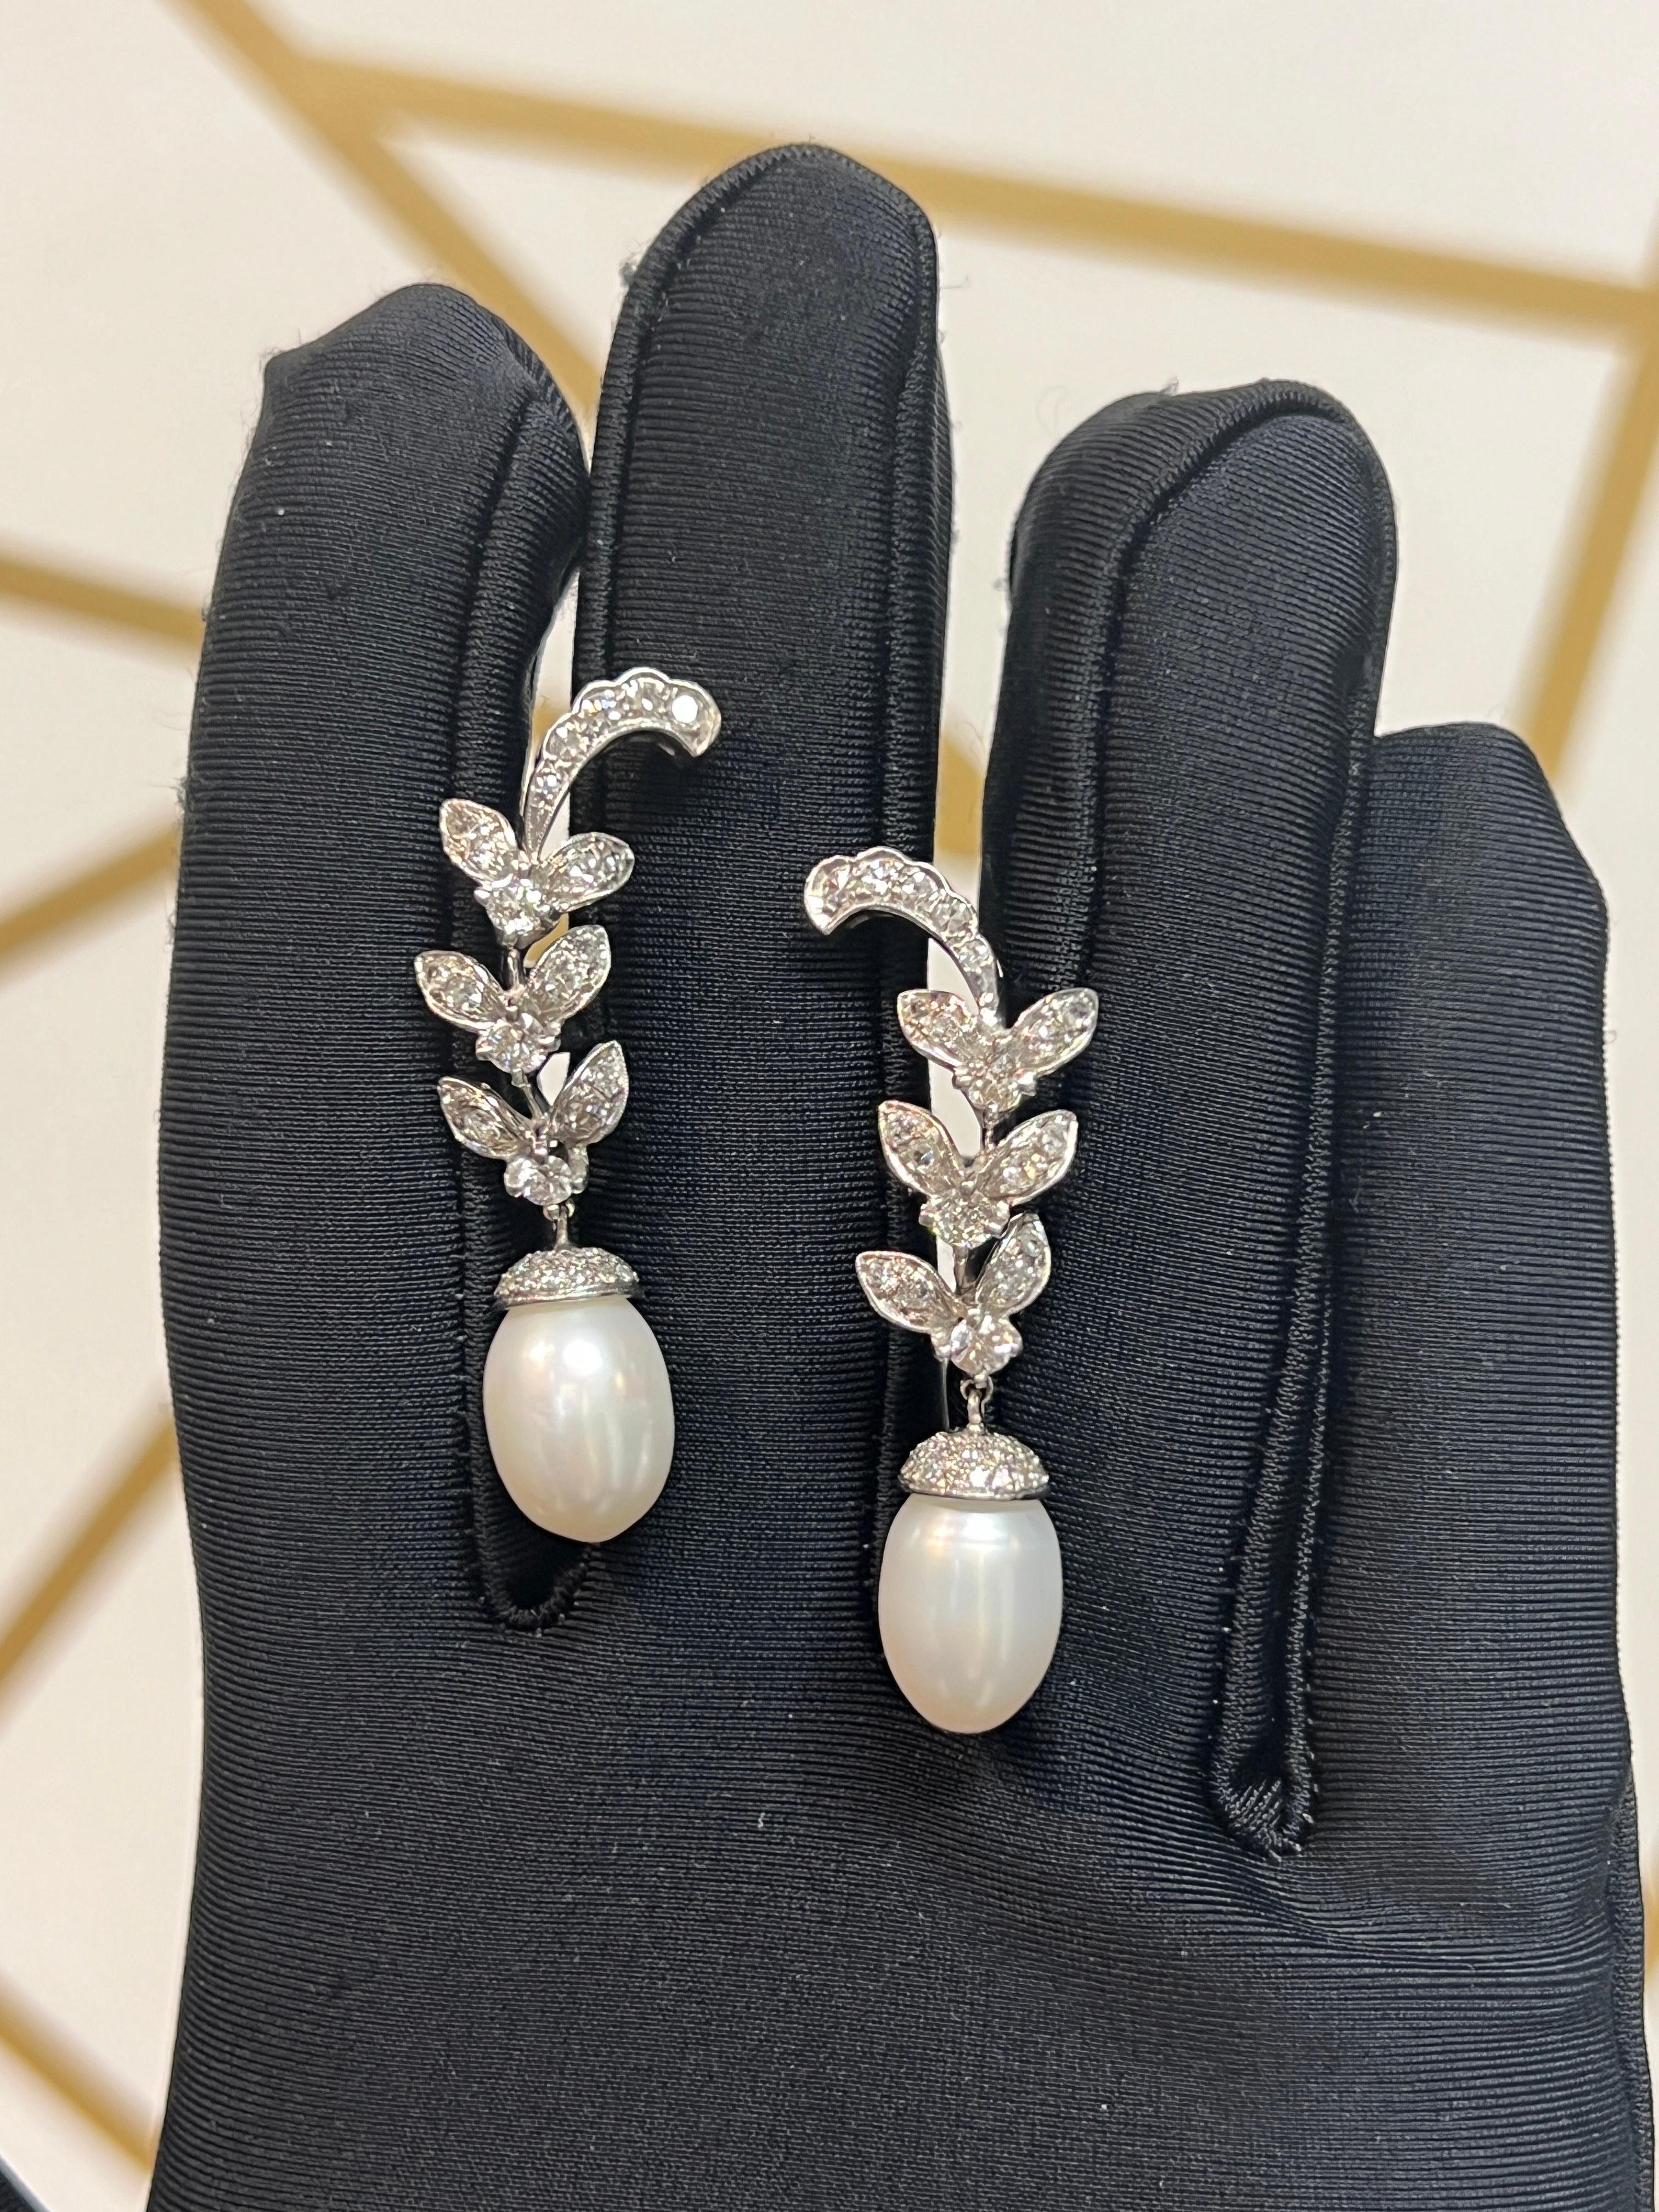 Mixed Cut Diamond and Pearl Earrings For Sale